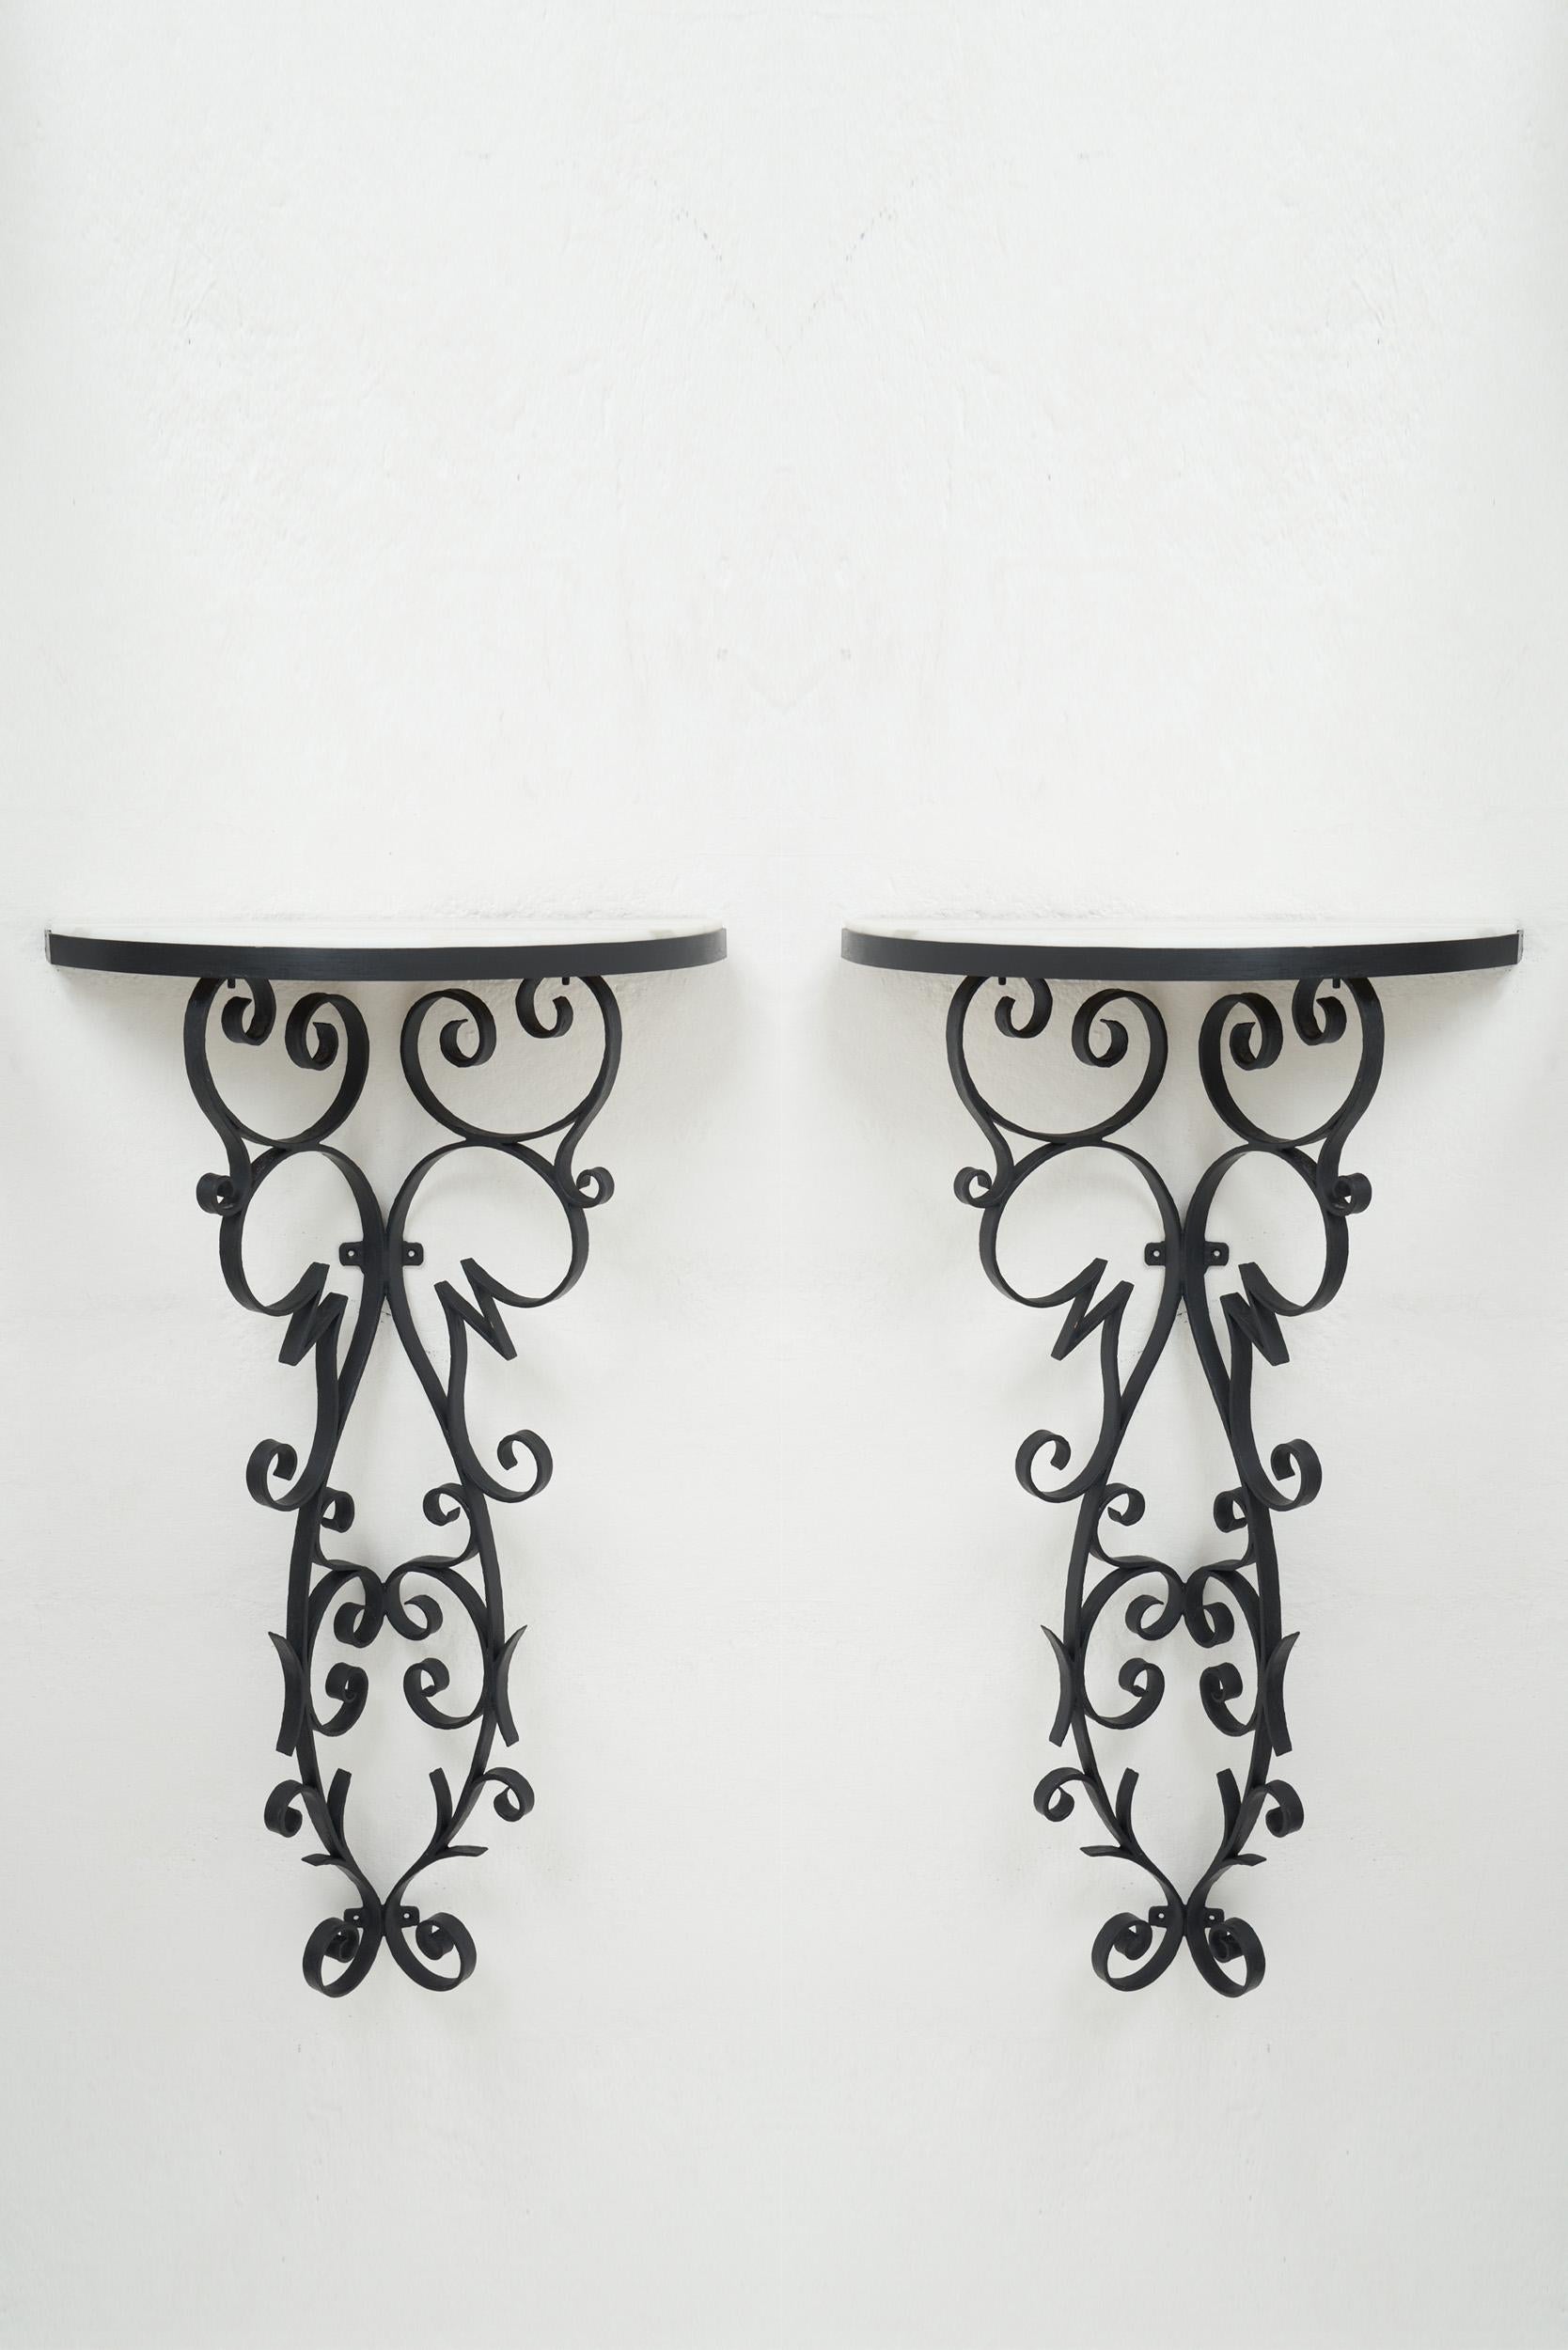 A pair of wrought iron and marble top console tables.
France, 1950s.
91 cm high by 50 cm wide by 21 cm deep.